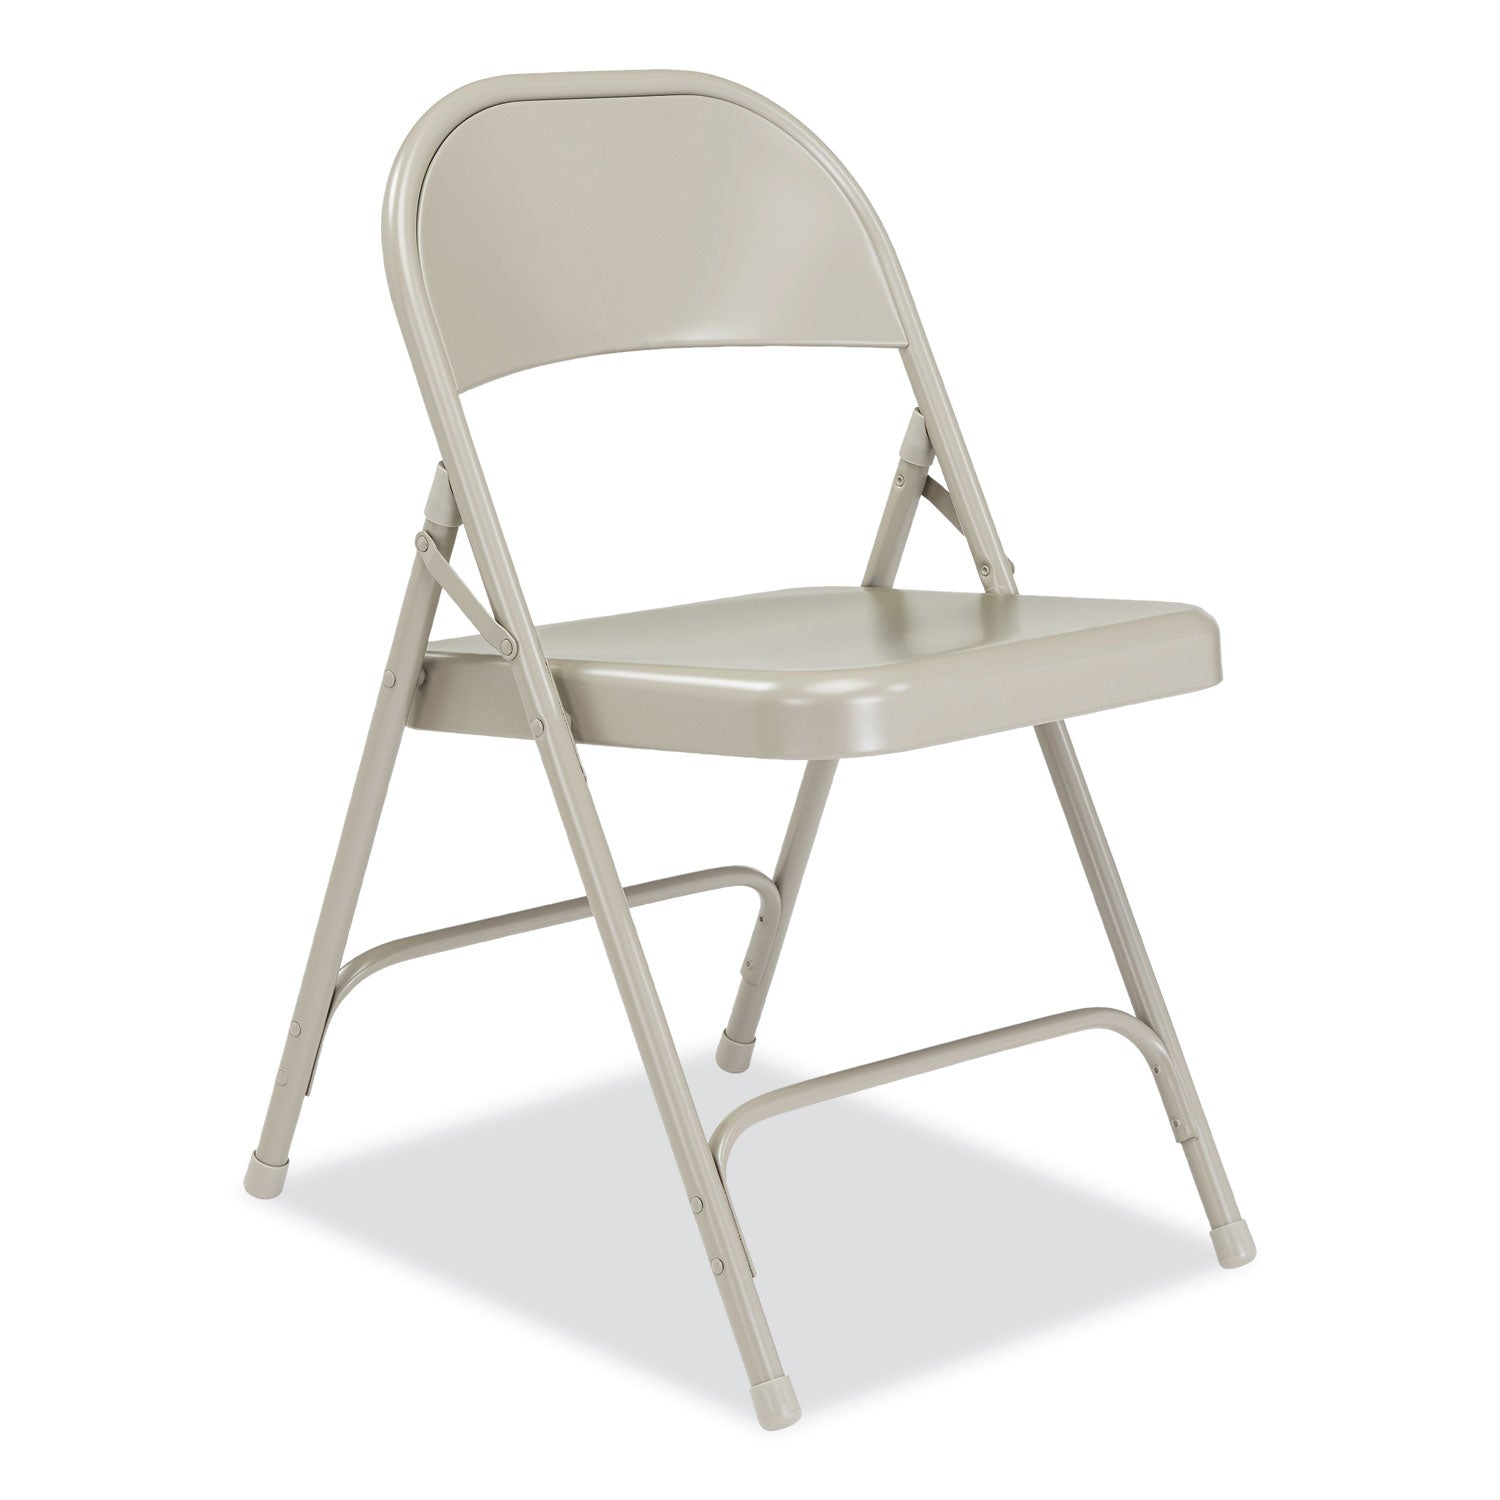 50-series-all-steel-folding-chair-supports-500-lb-1675-seat-height-gray-seat-back-base-4-carton-ships-in-1-3-bus-days_nps52 - 2